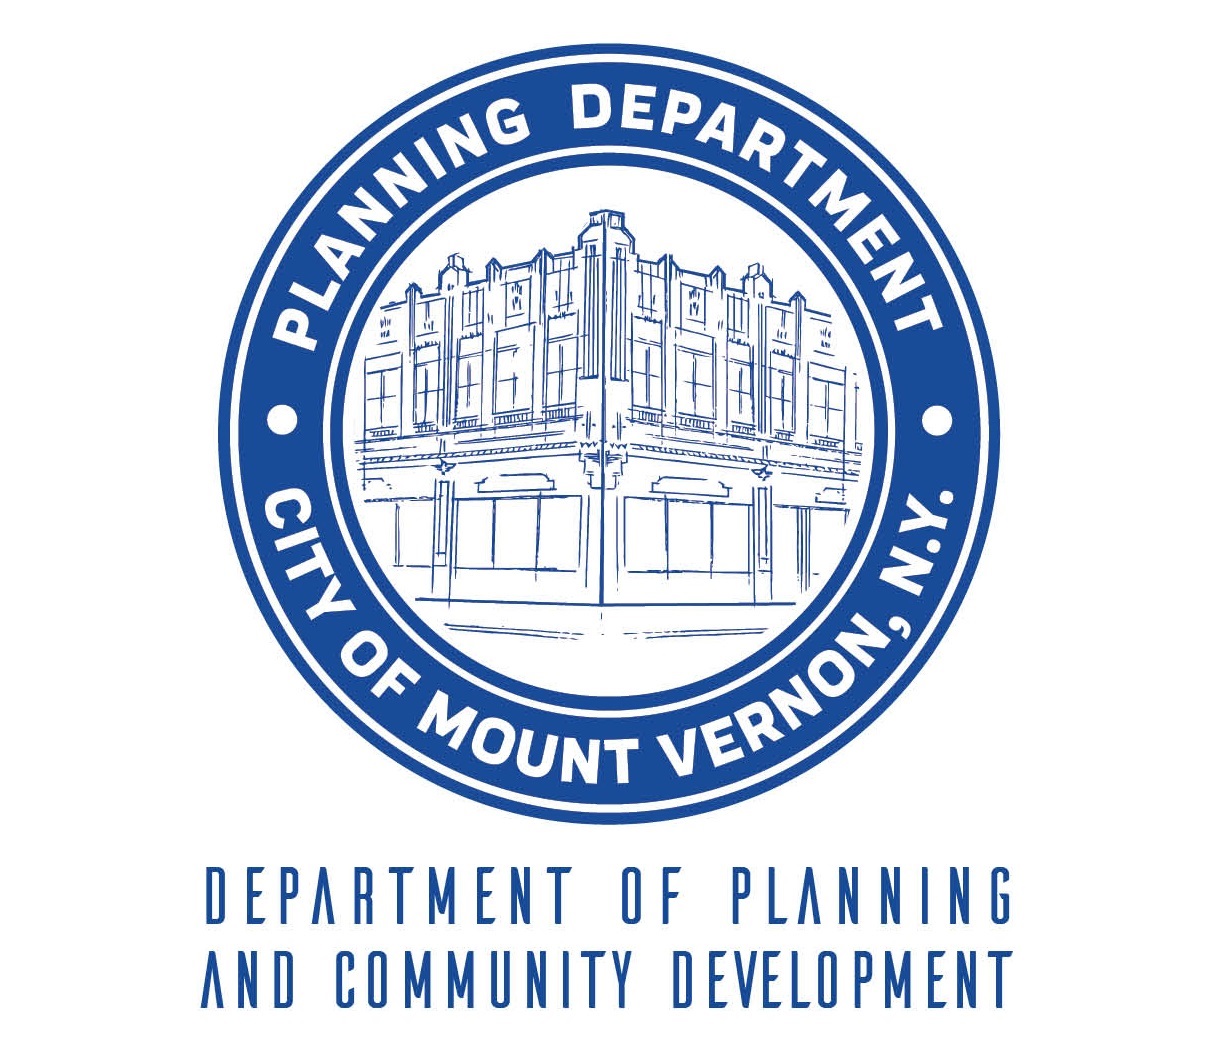 The City of Mount Vernon's Department of Planning and Community Development